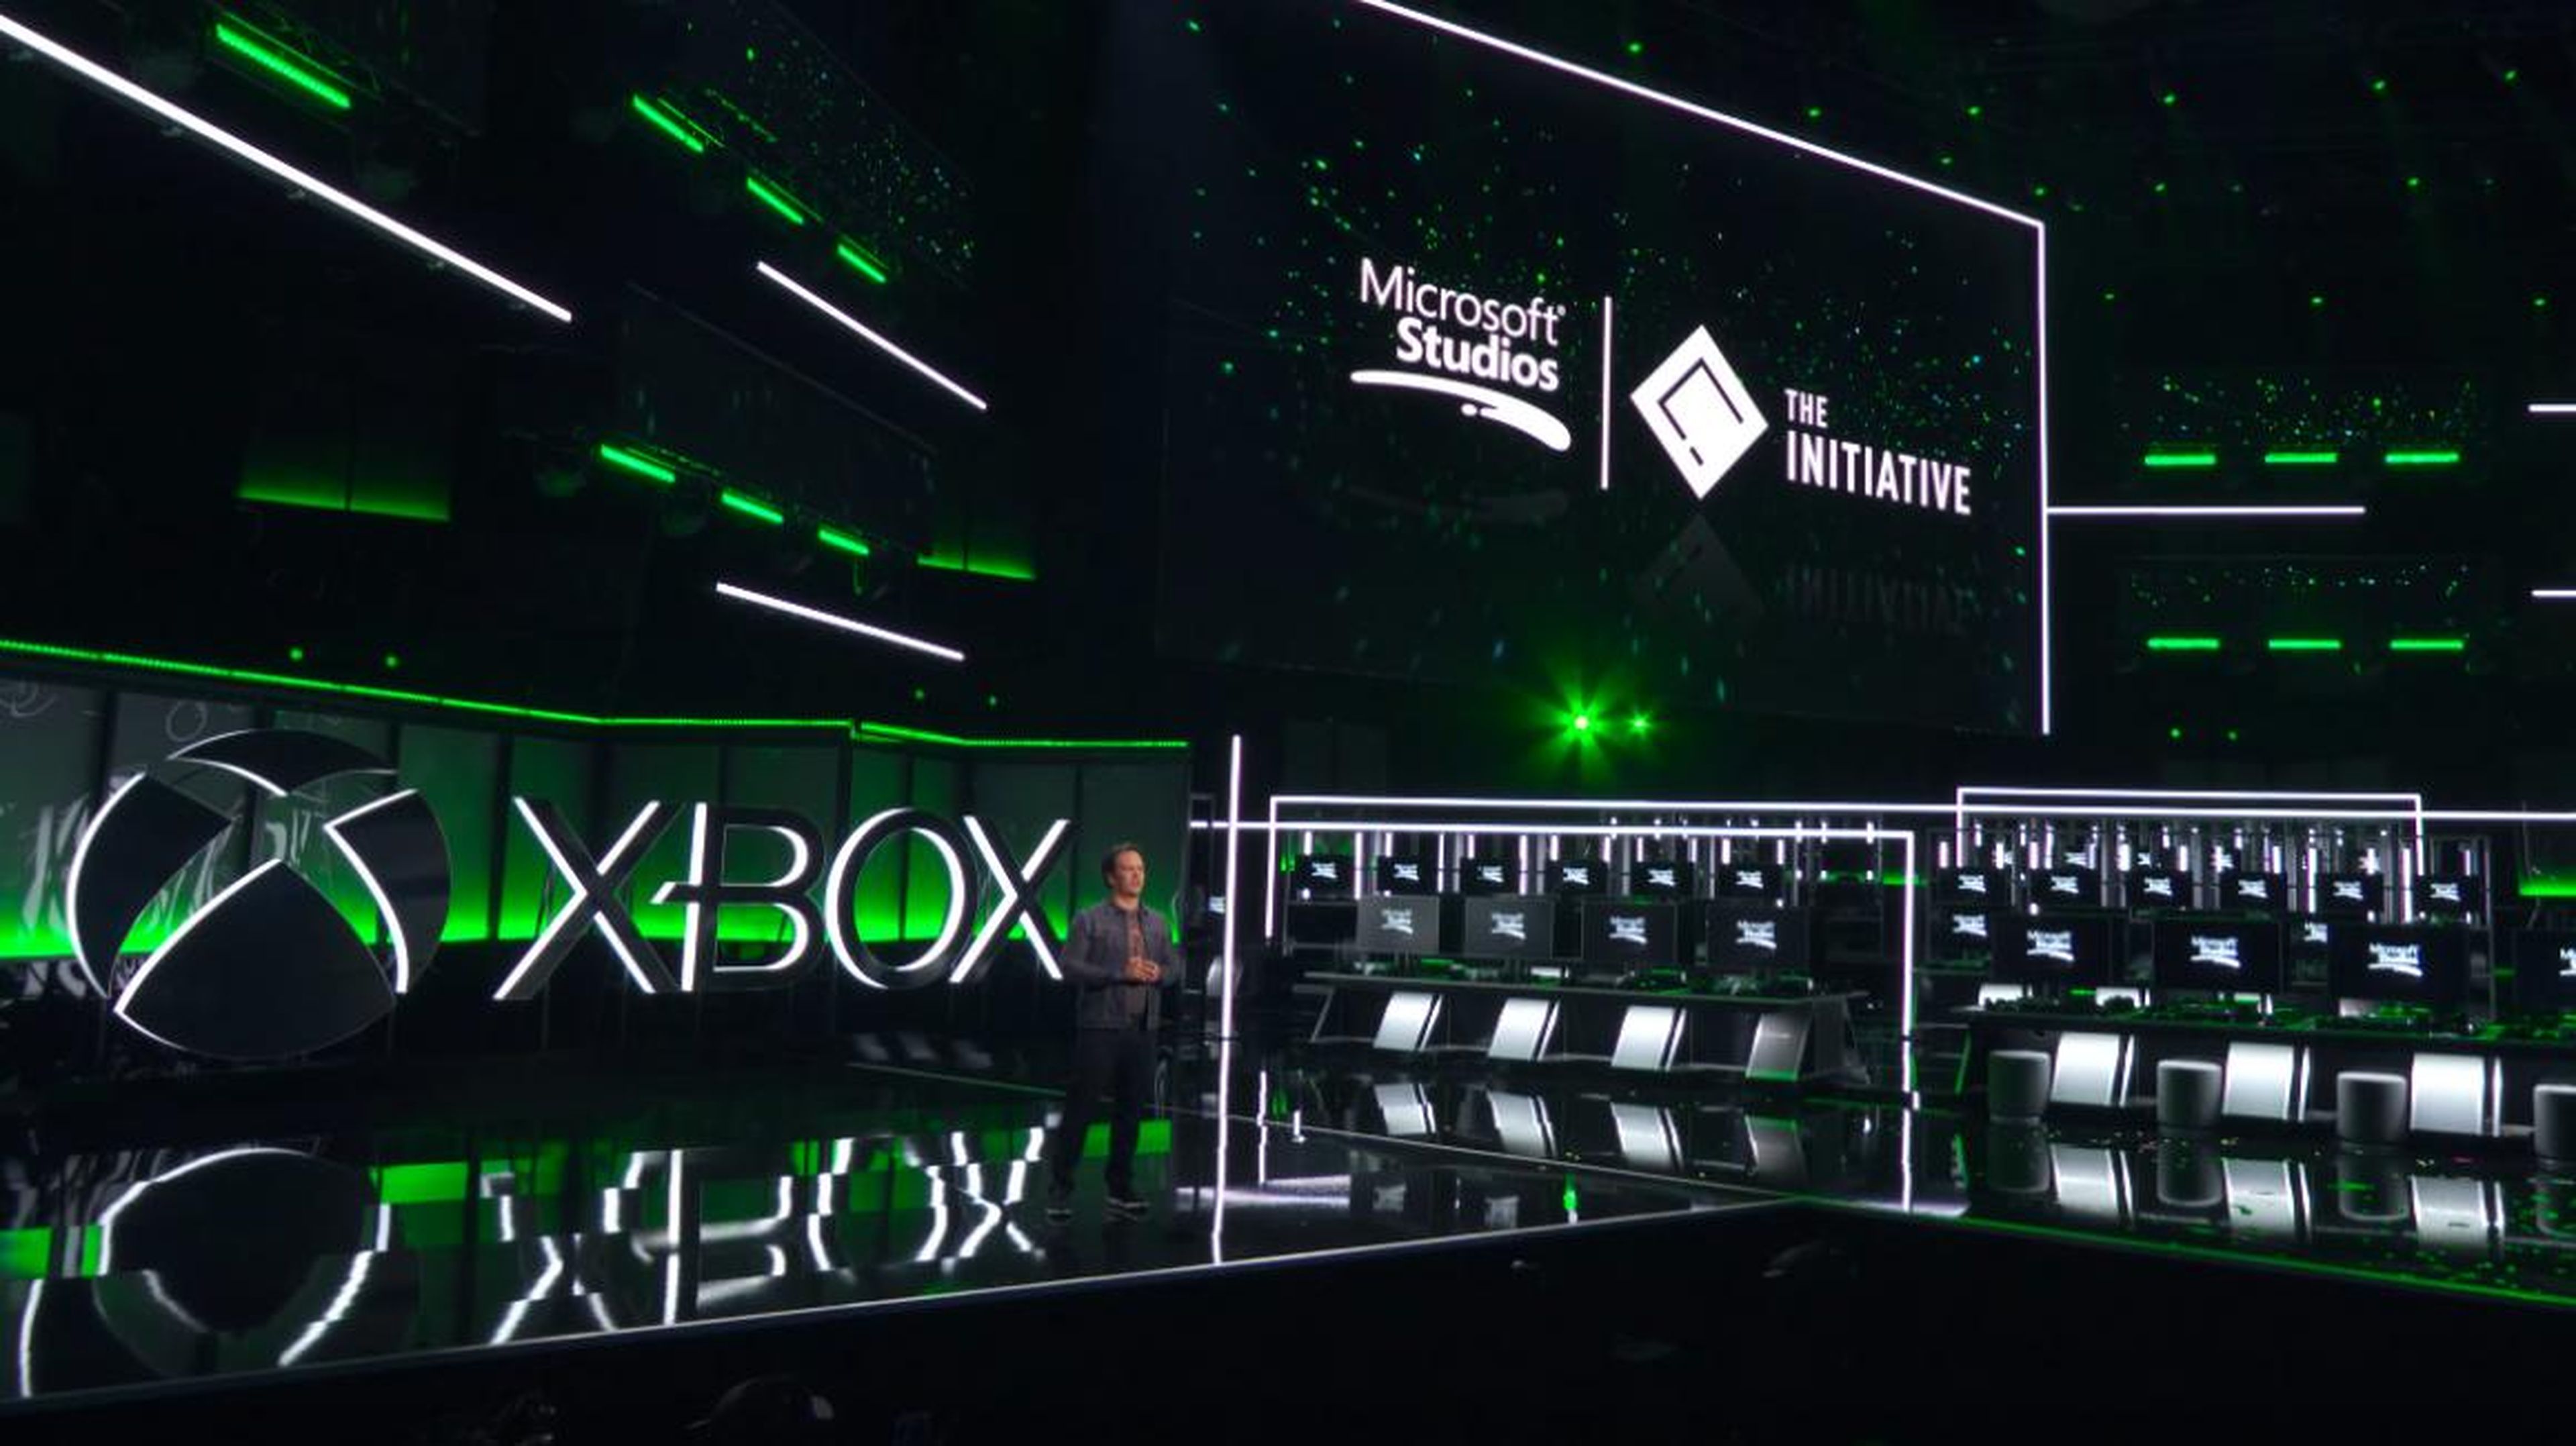 Phil Spencer on stage at Microsoft's E3 2018 press briefing.